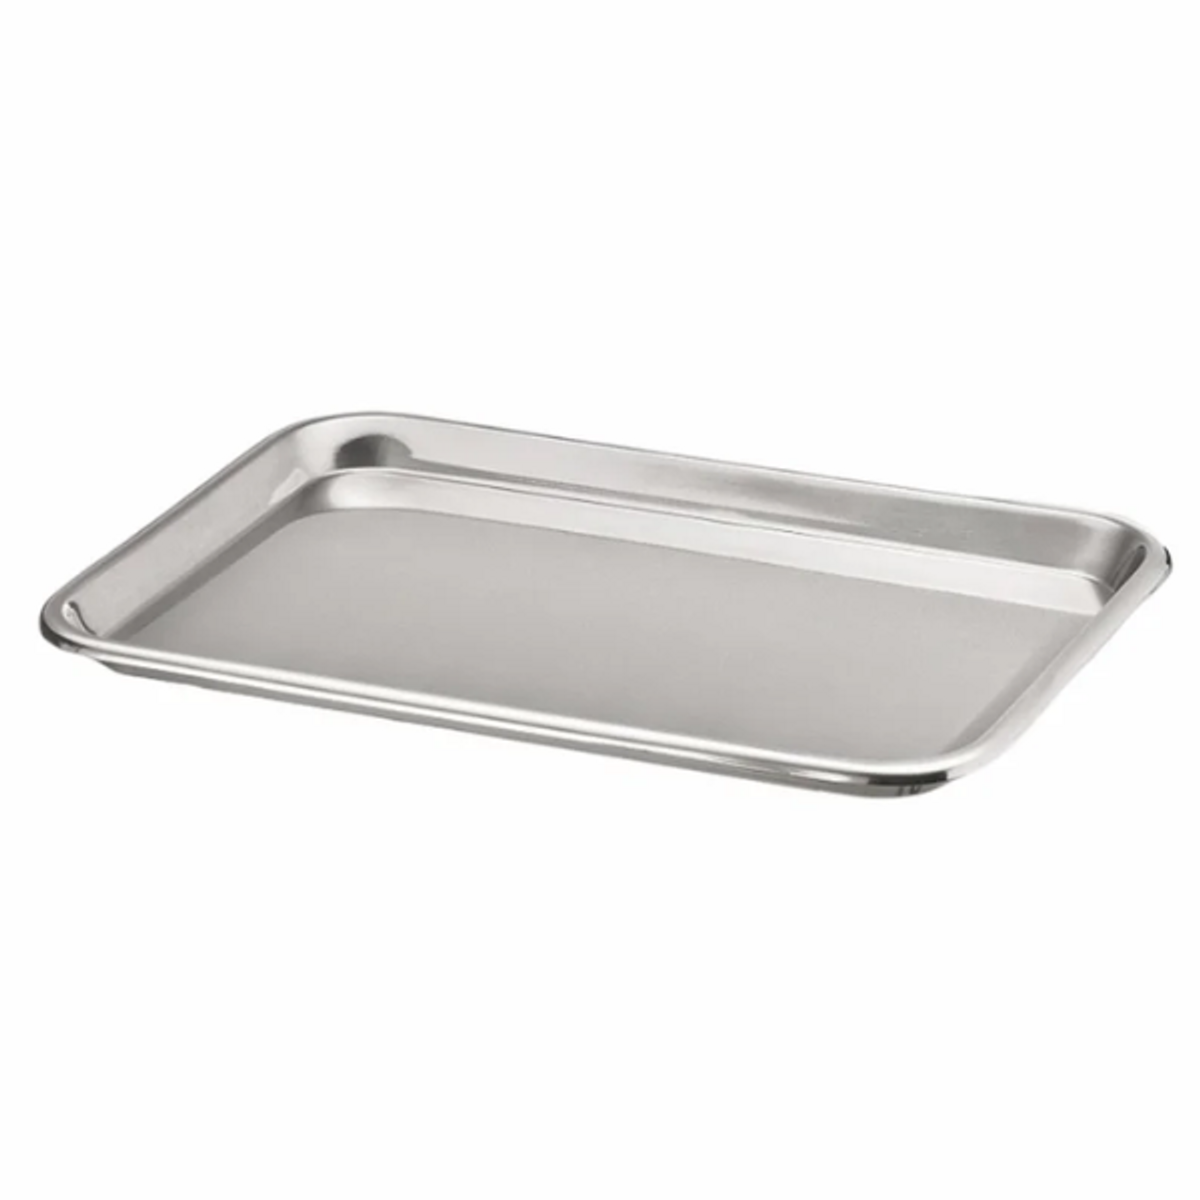 Dukal Tech-Med Stainless Steel Flat Instrument Trays